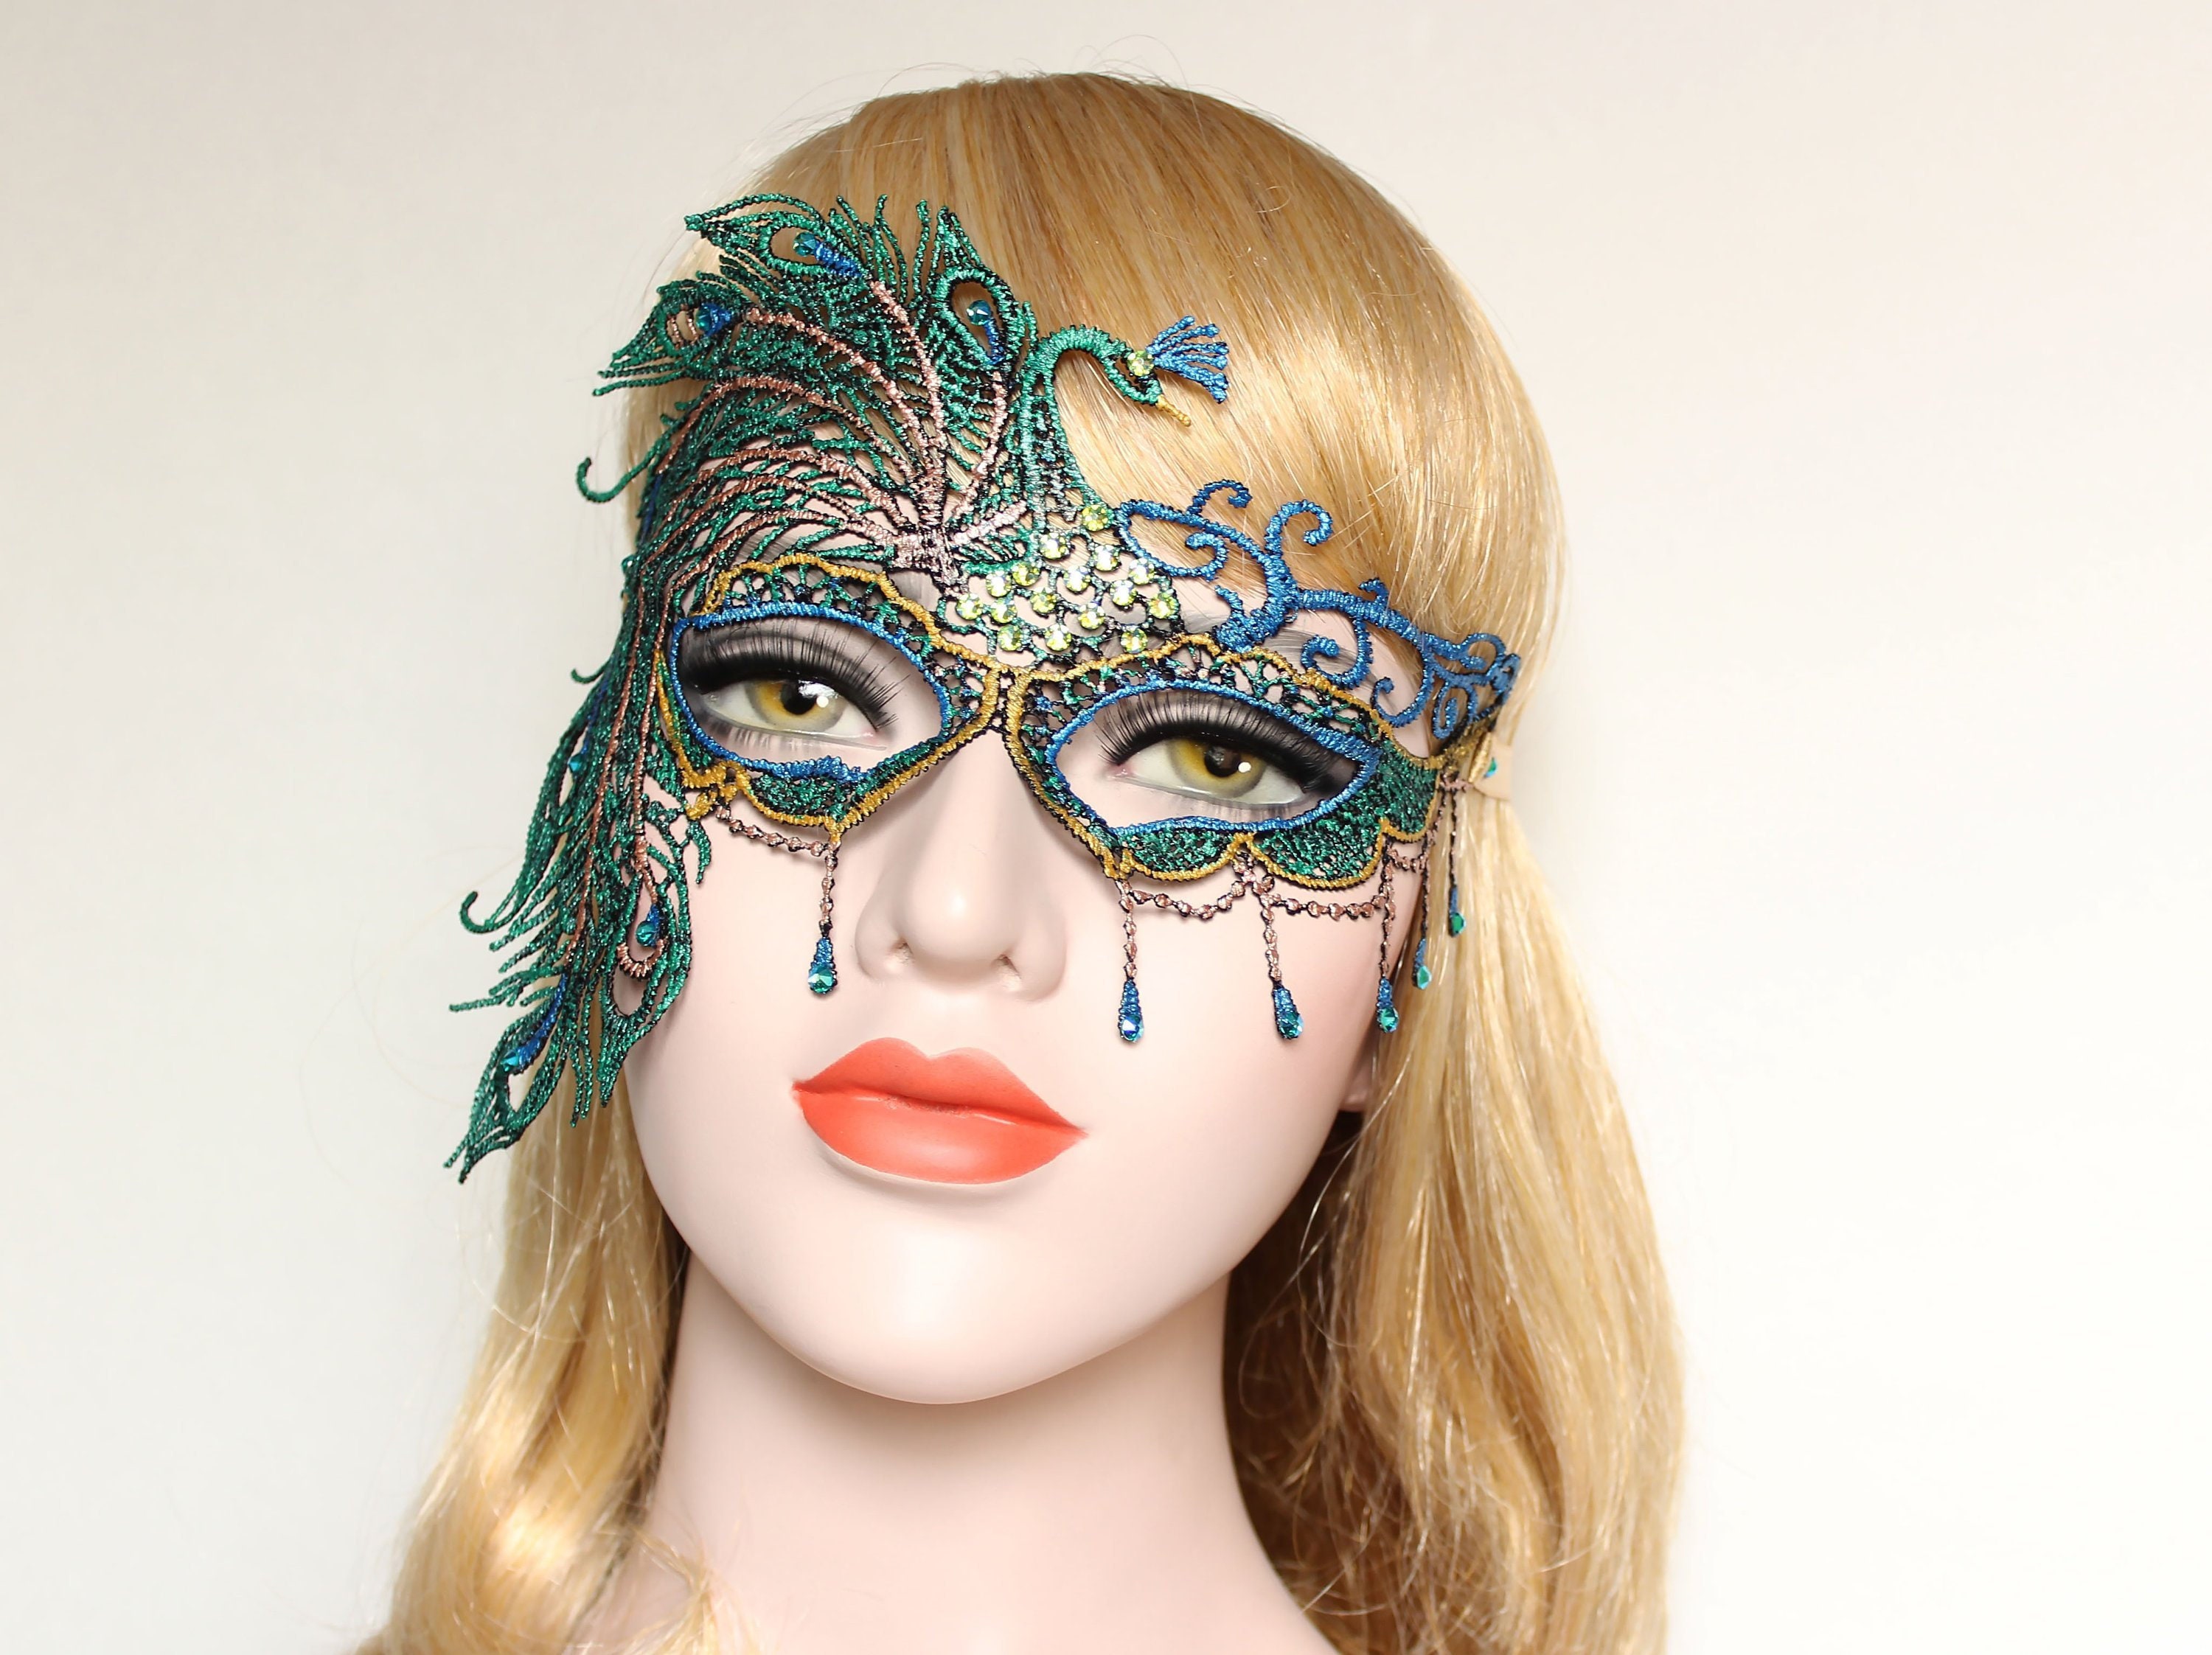 Crystal Masquerade Mask Peacock Feather Mask Fifty Shades Etsy